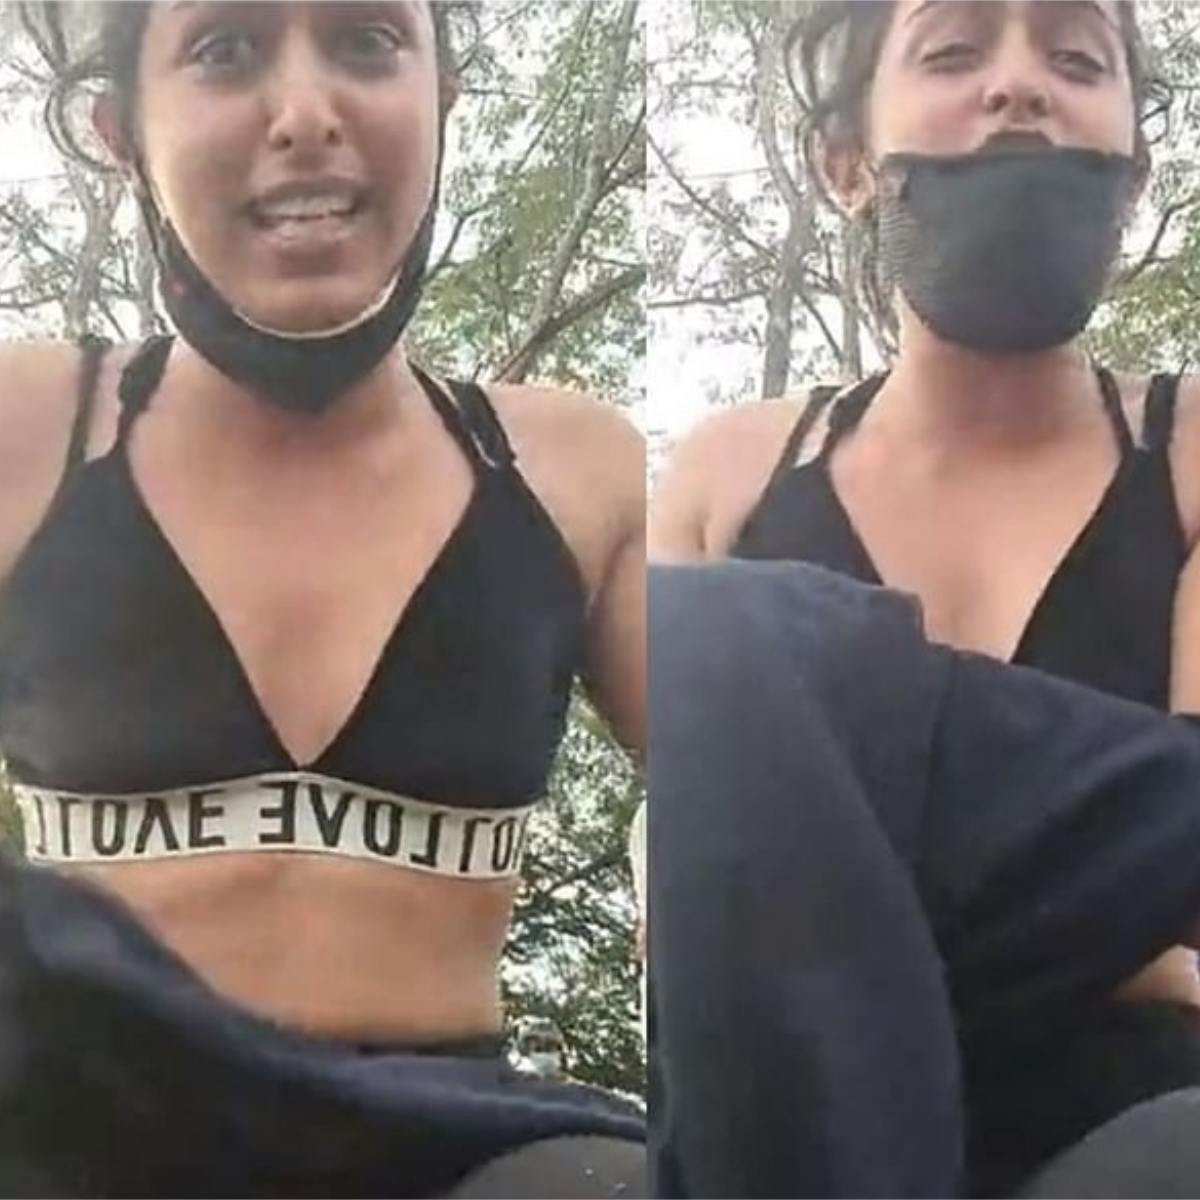 Kannada star Samyuktha Hegde shares ordeal of being assaulted while working out; Shares video of the attack